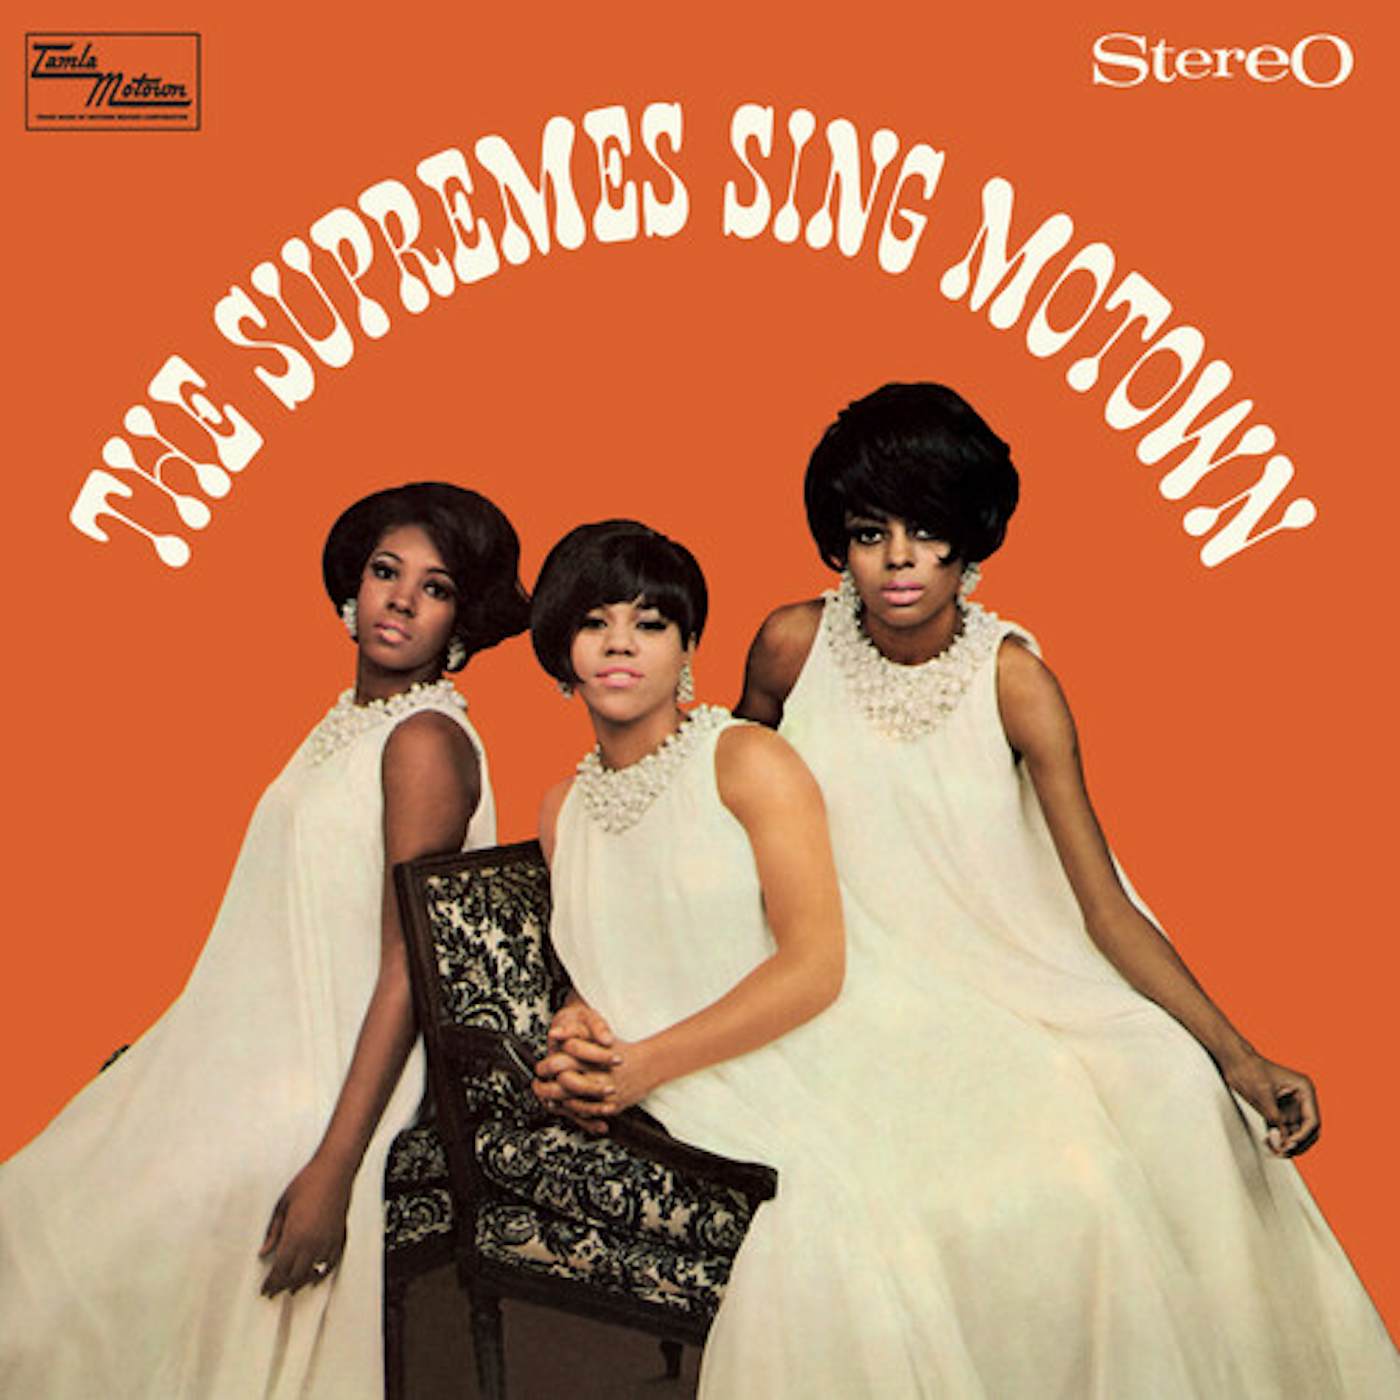 The Supremes SING MOTOWN Vinyl Record